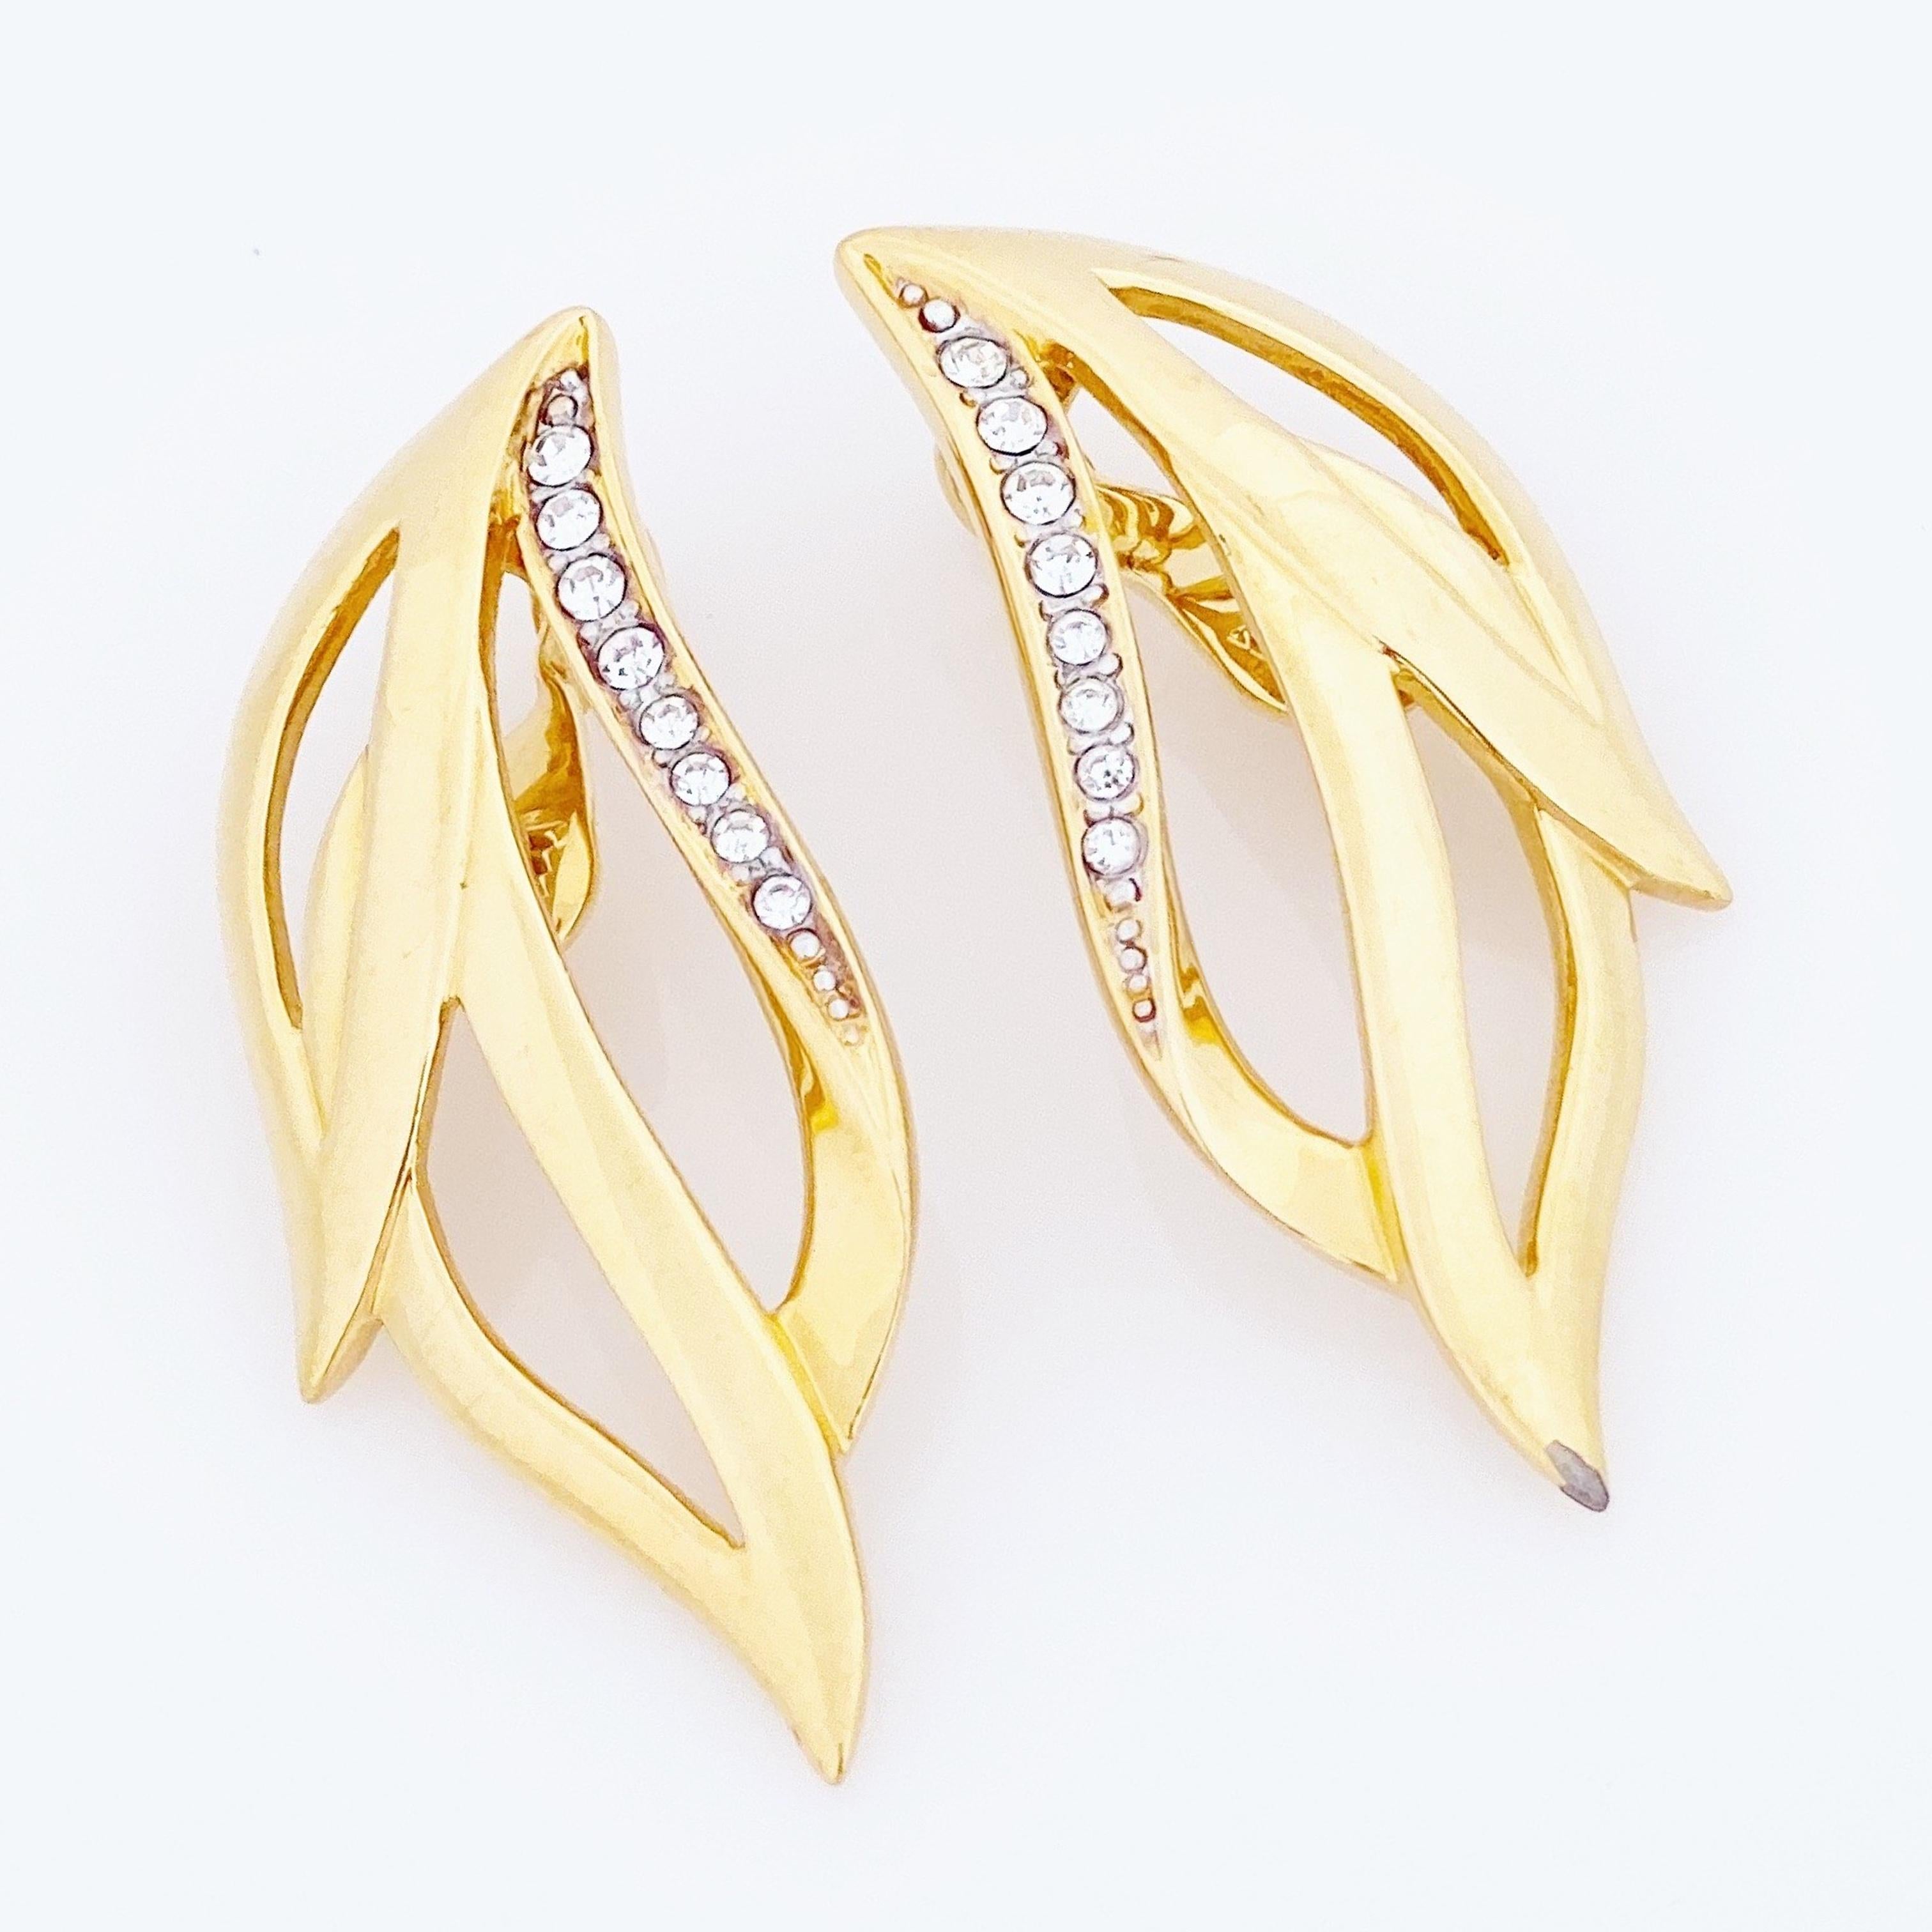 Modern Oversized Gold Abstract Climber Earrings With Rhinestones By Monet, 1980s For Sale